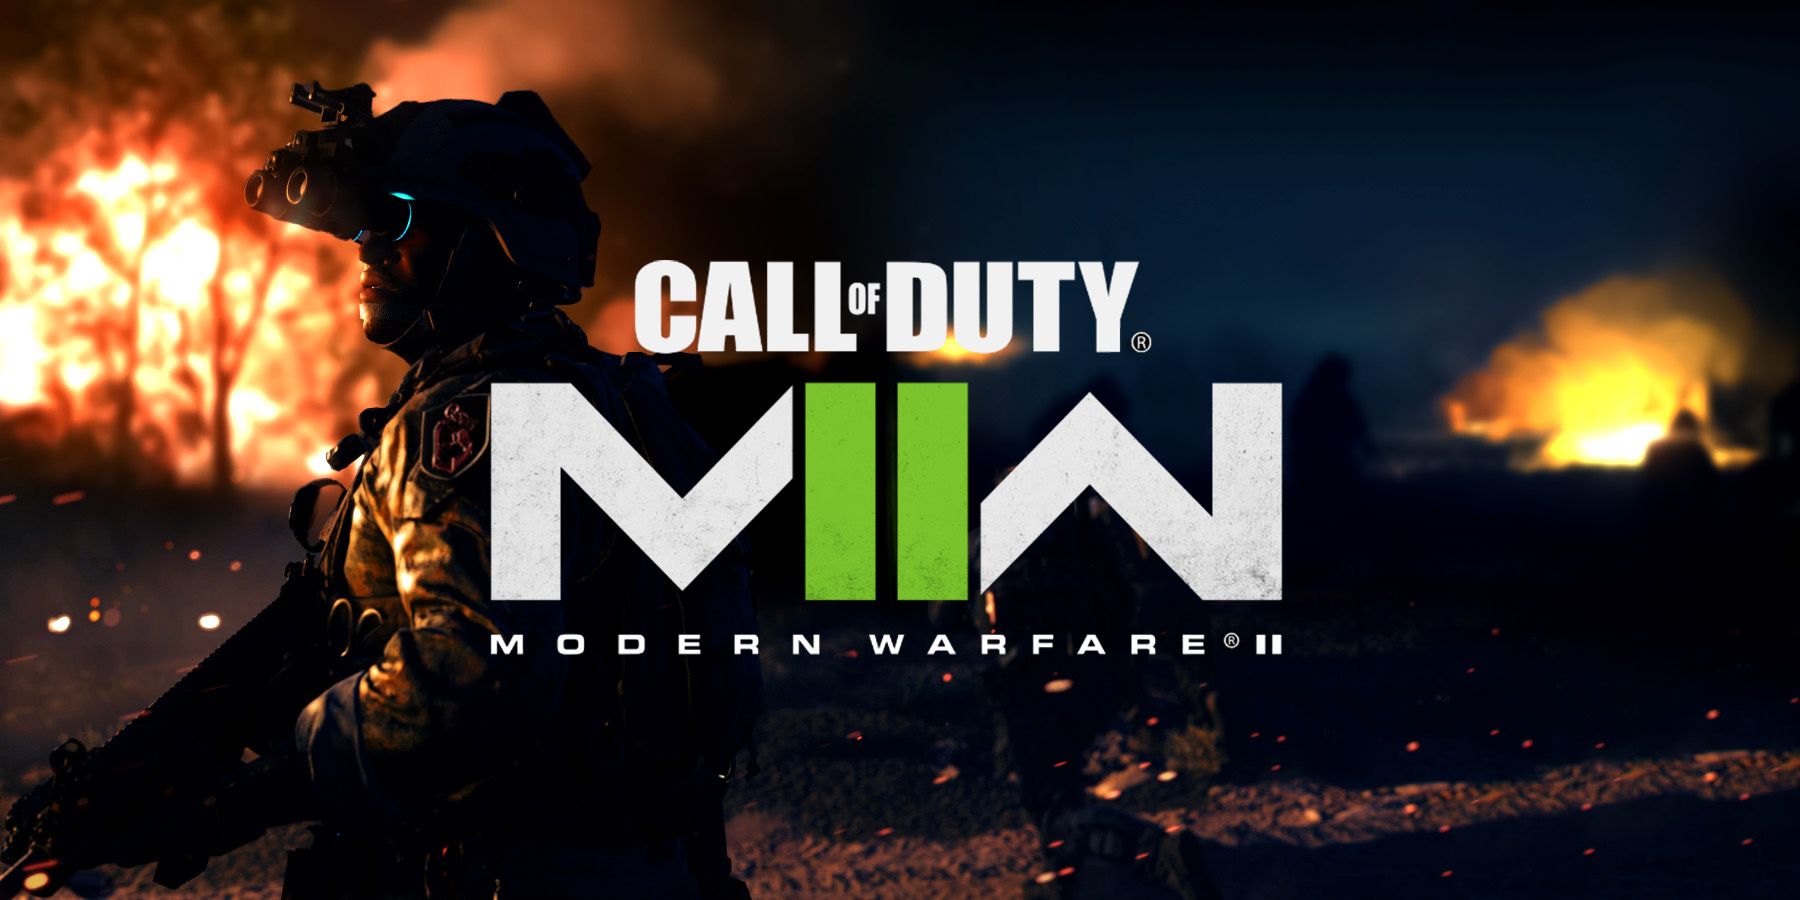 call of duty modern warfare 2 logo and soldier